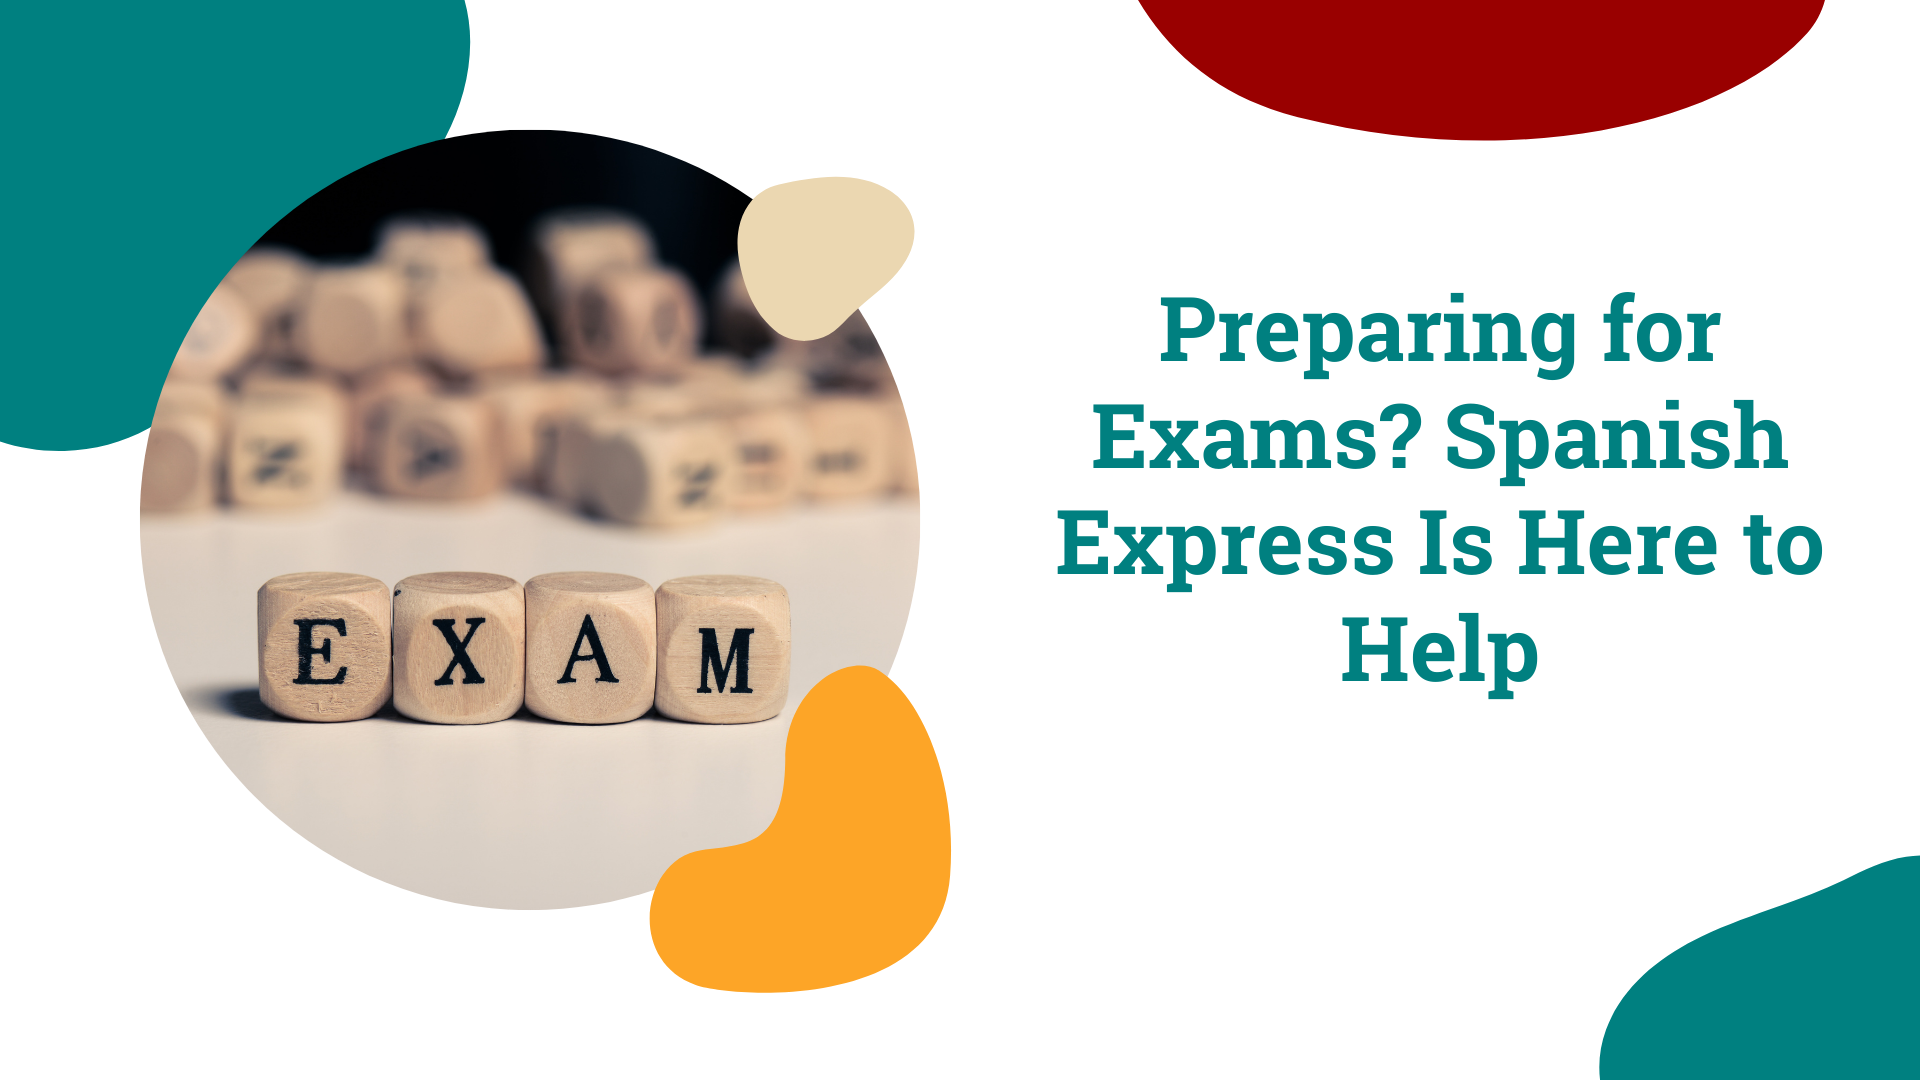 Preparing for Exams? Spanish Express Is Here to Help